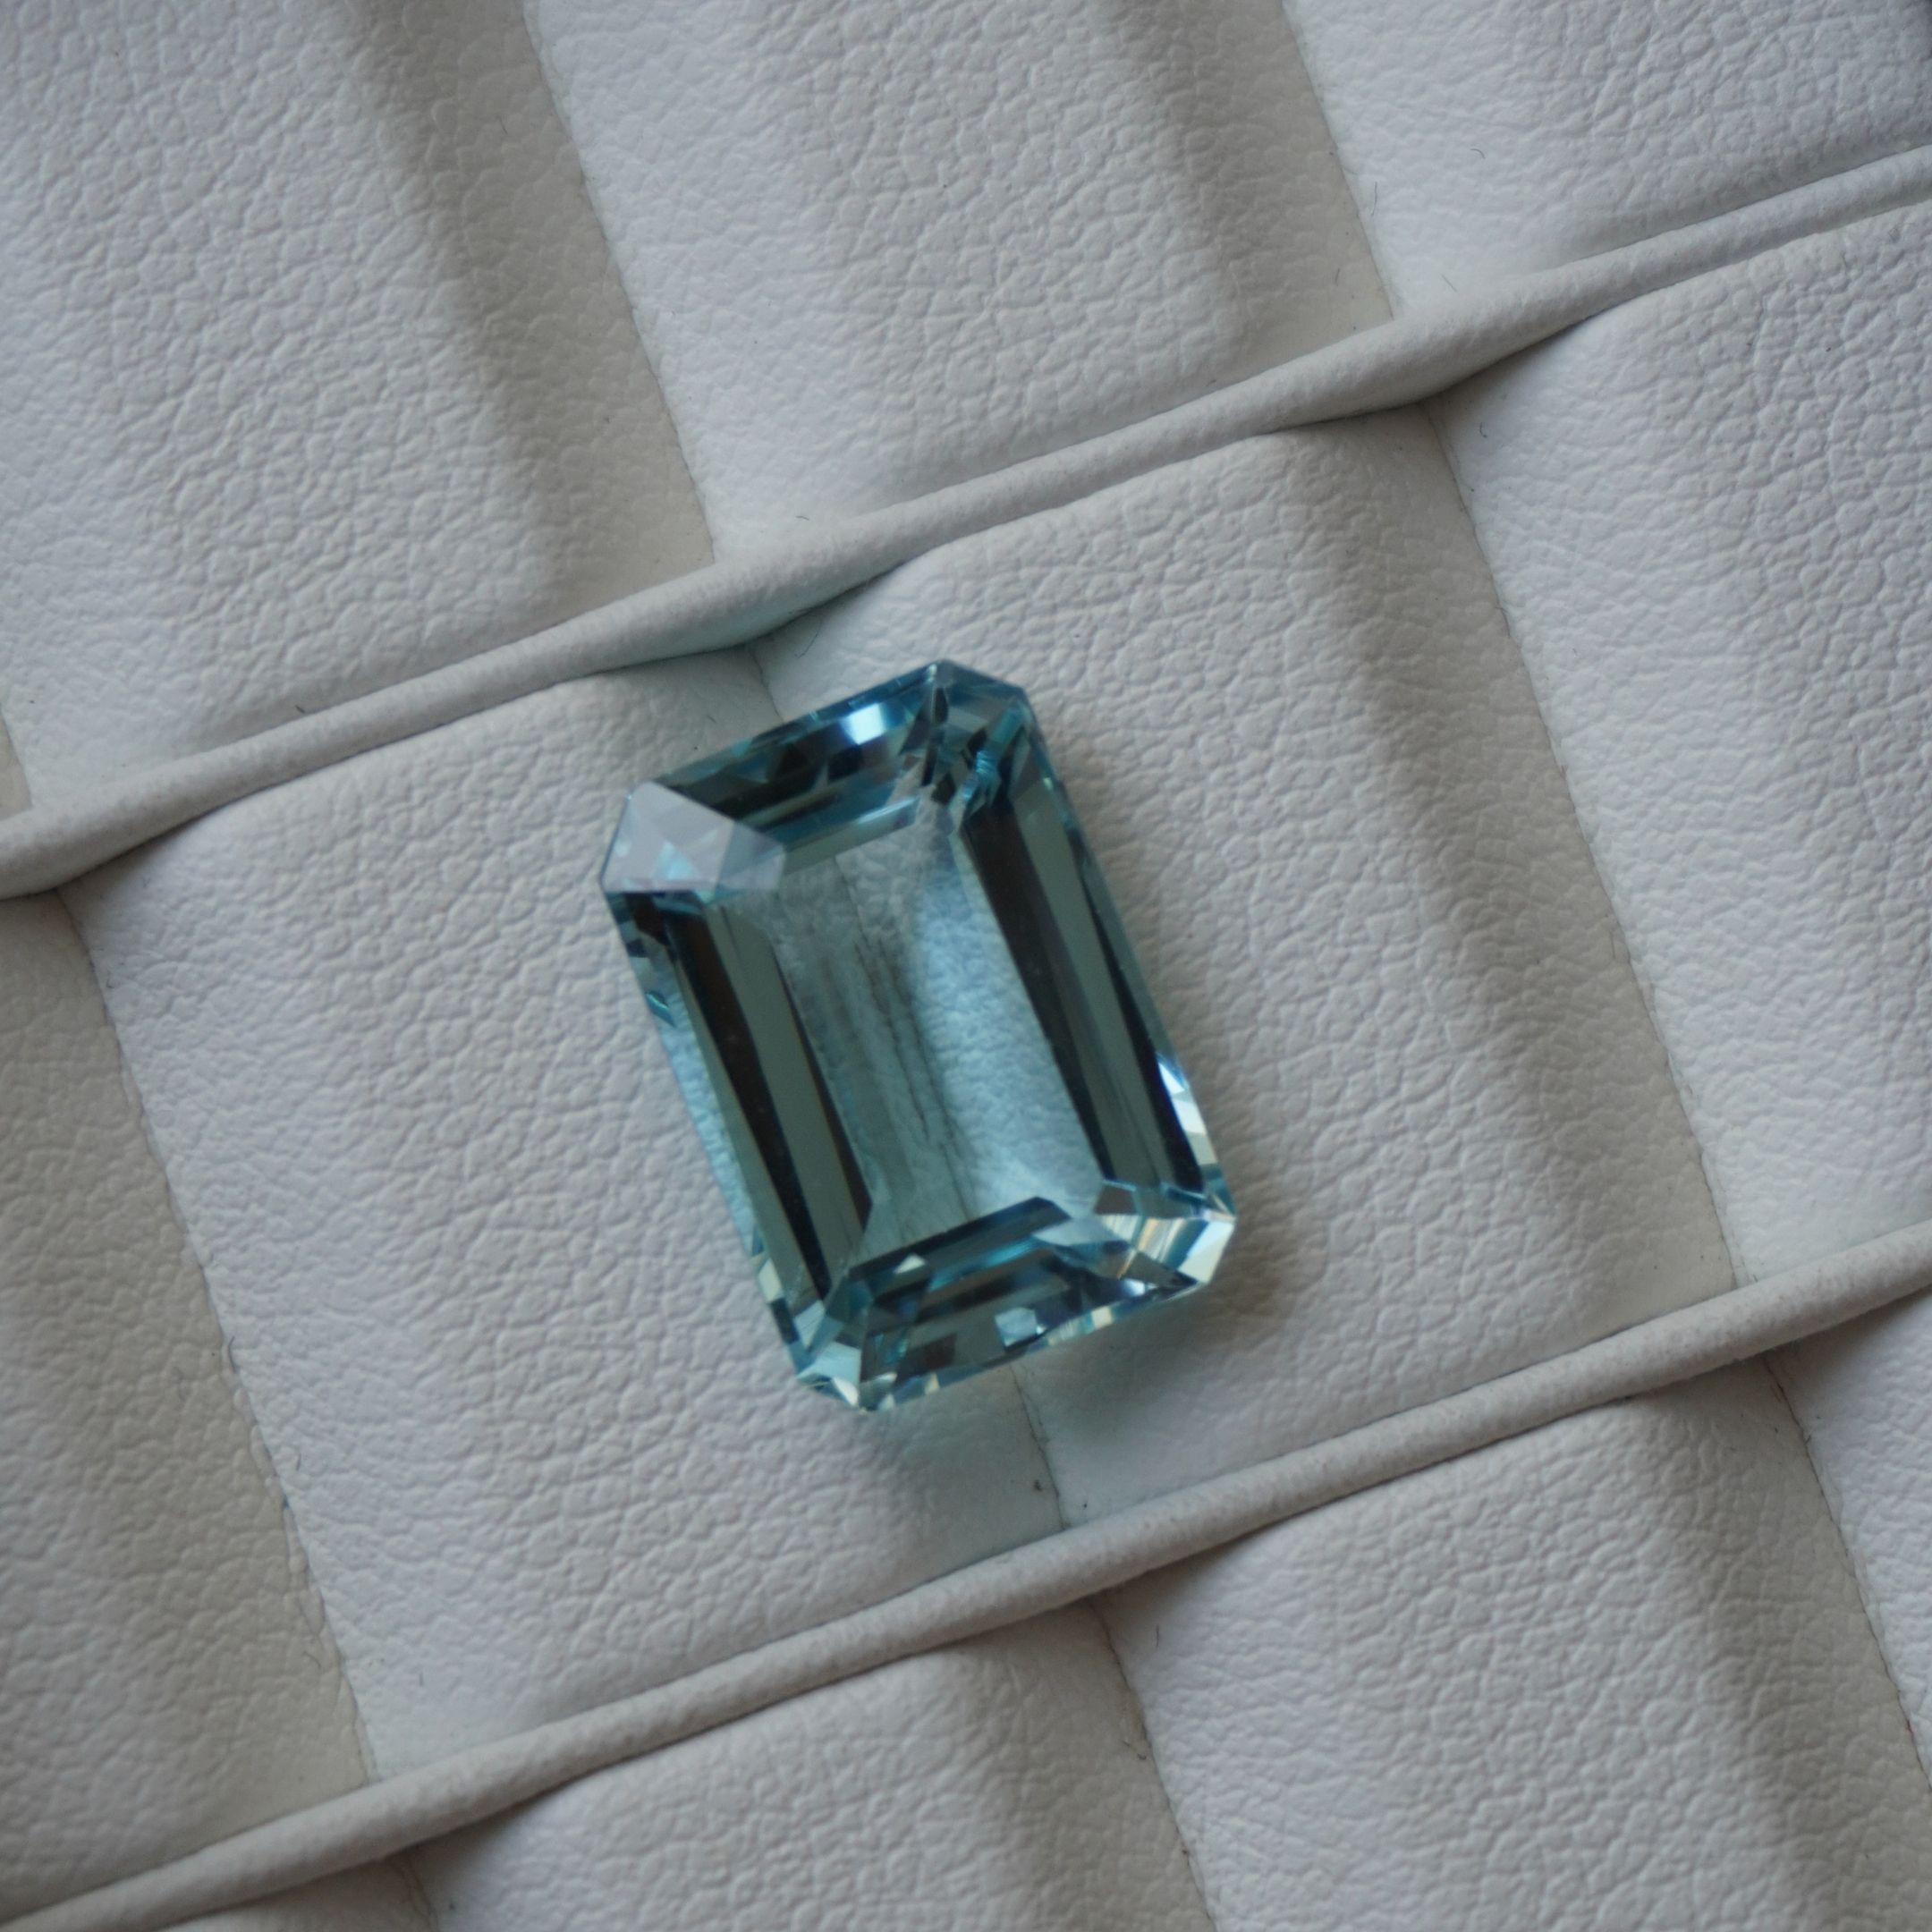 DETAILS
Aquamarine Weight: 7.57 CT
Shape: Emerald-cut
Color: Blue
Hardness: 7.5 - 8
Birthstone: March
Natural

WANT TO CUSTOM ORDER?
We customize high jewelry made with quality gemstones and diamonds. Please allow custom order 1-3 weeks. 

•